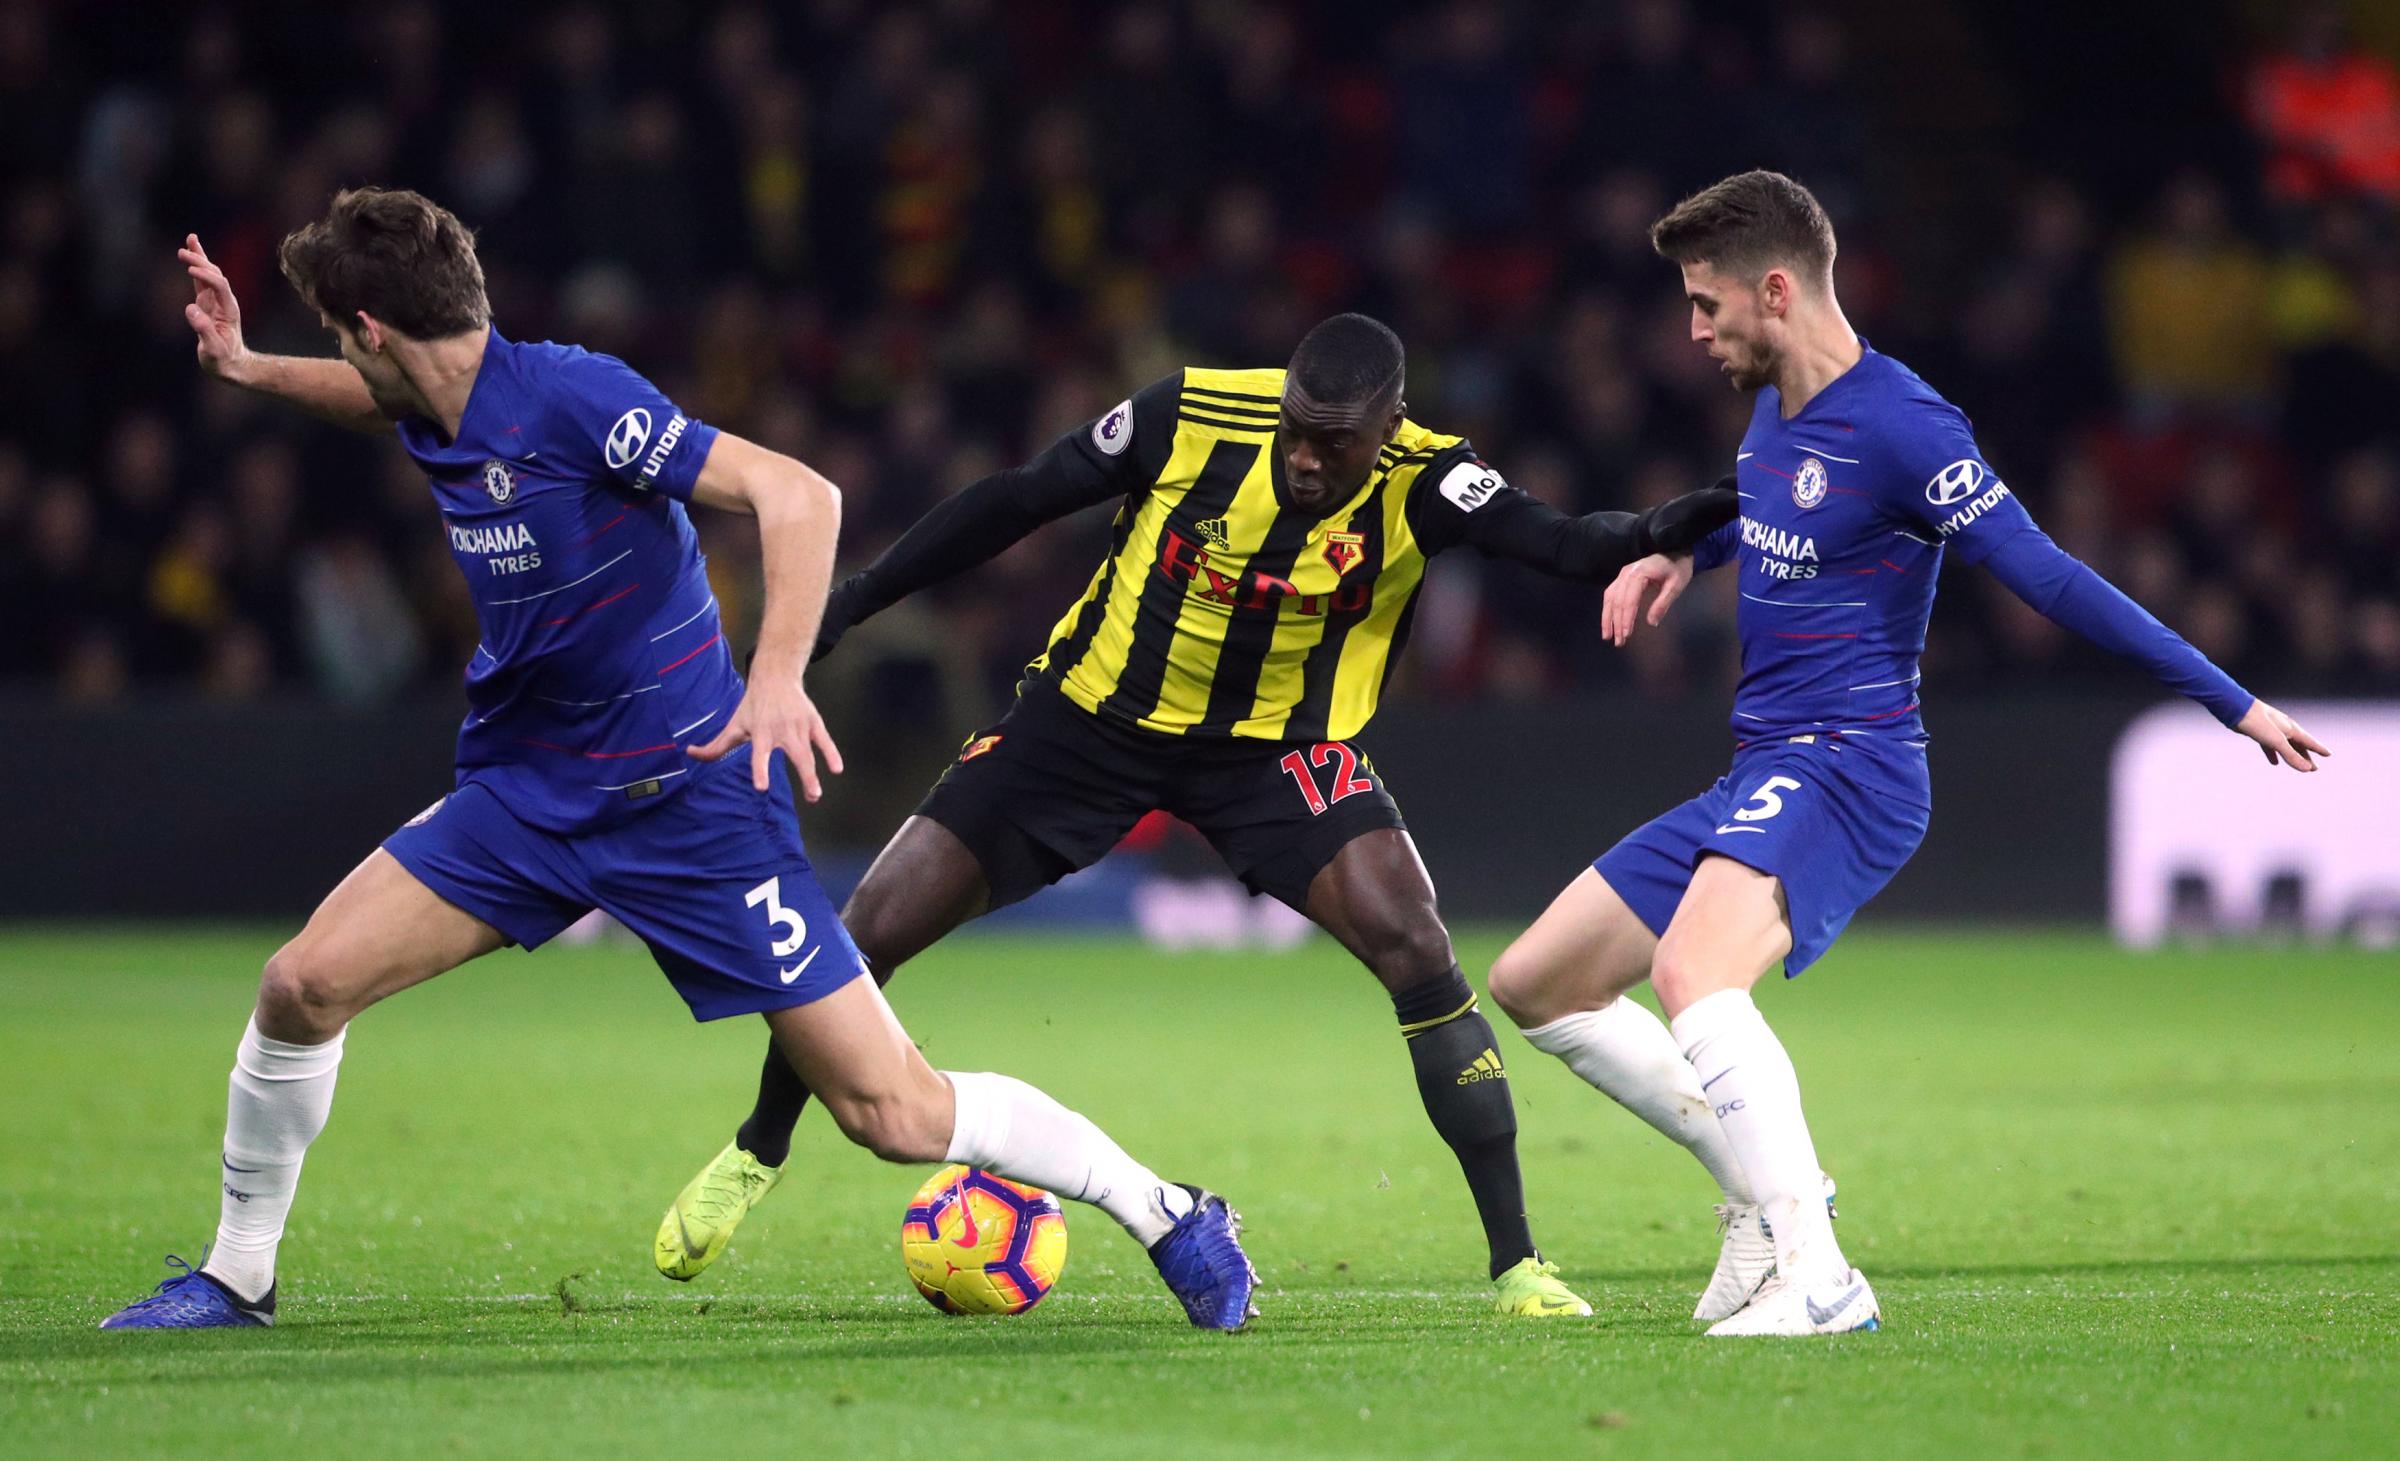 Watford is Sema's home - but he nearly left after a season